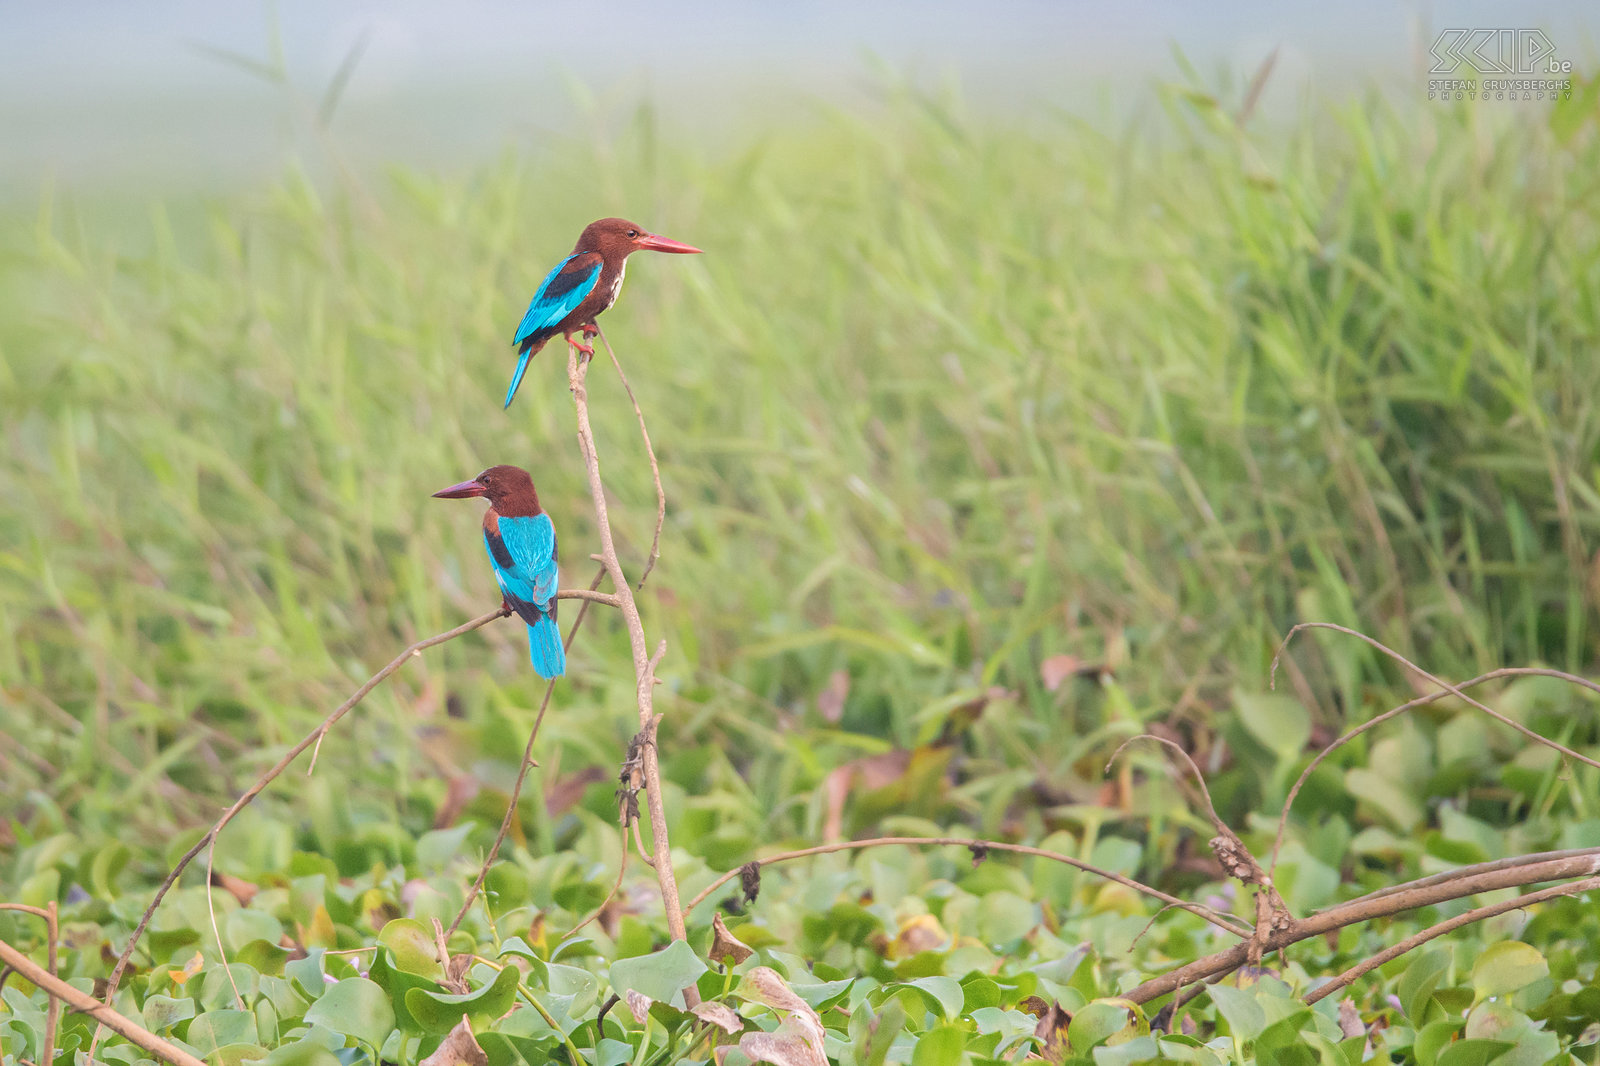 Kumarakom - White-throated kingfishers We started our journey with a boat trip in Kumarakom Bird Sanctuary in the backwaters in the state of Kerala. We saw many species of waterbird including this couple white-throated kingfishers (Halcyon smyrnensis) Stefan Cruysberghs